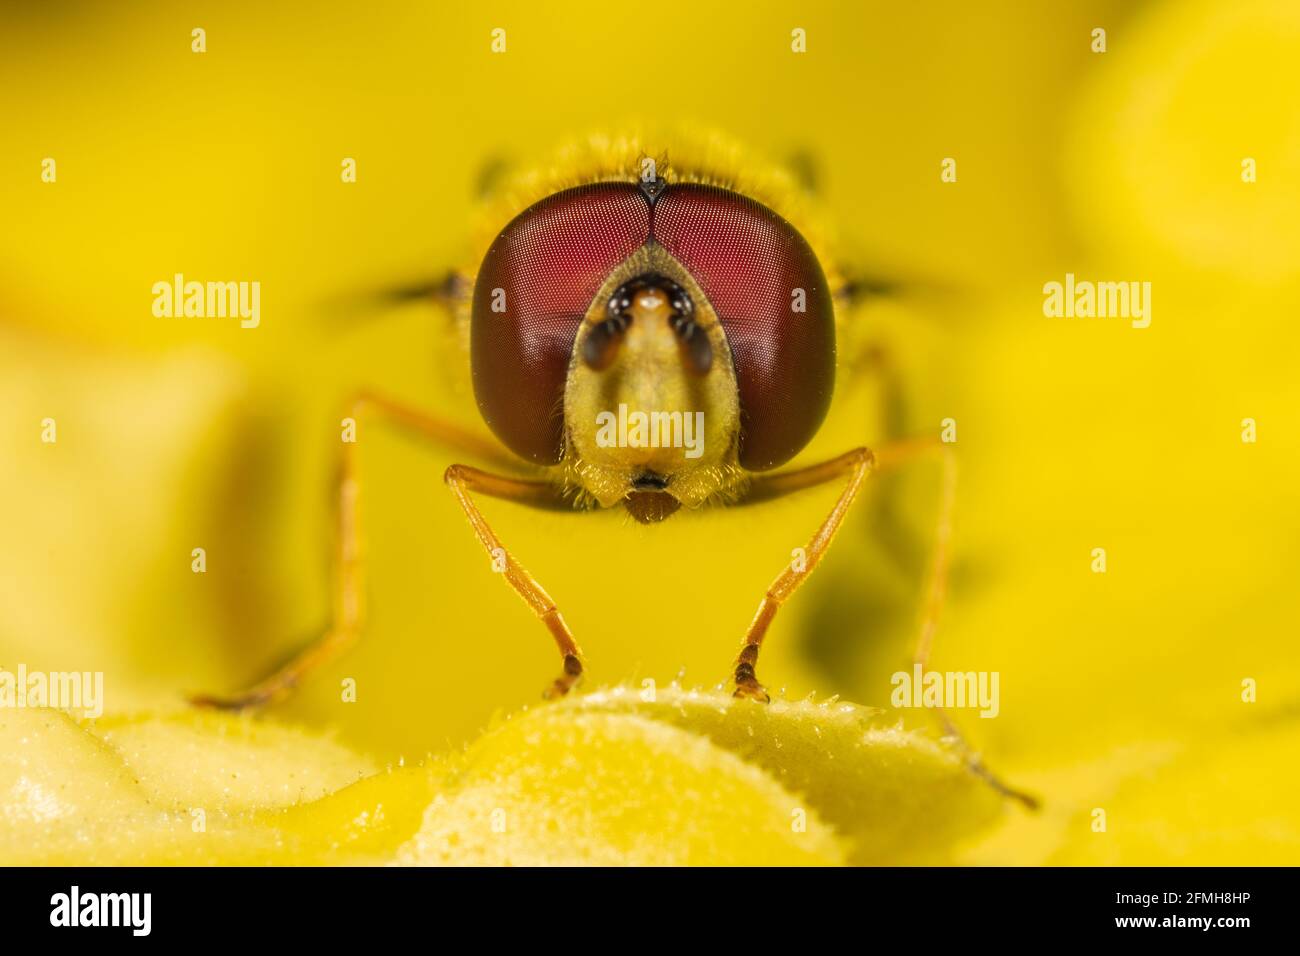 Front view of a hoverfly (syrphid fly) resting on some yellow leaves, Its big red compound eyes being the main focus. Stock Photo